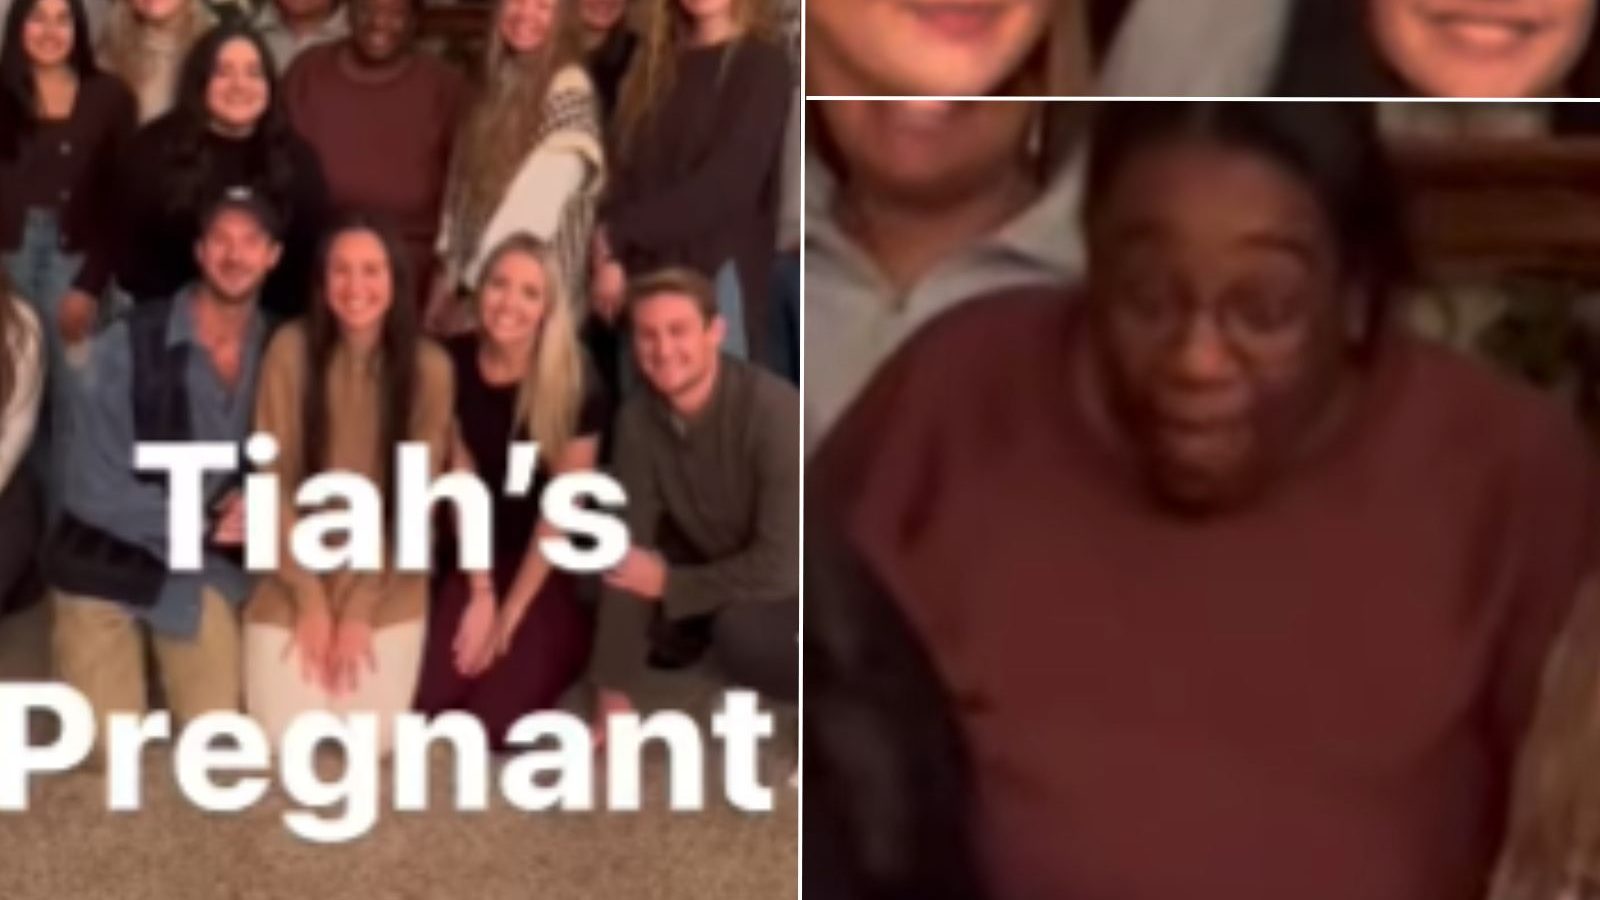 ‘incredible Reveal Video Of Couples Pregnancy Announcement Captures Friends Epic Reactions 6913